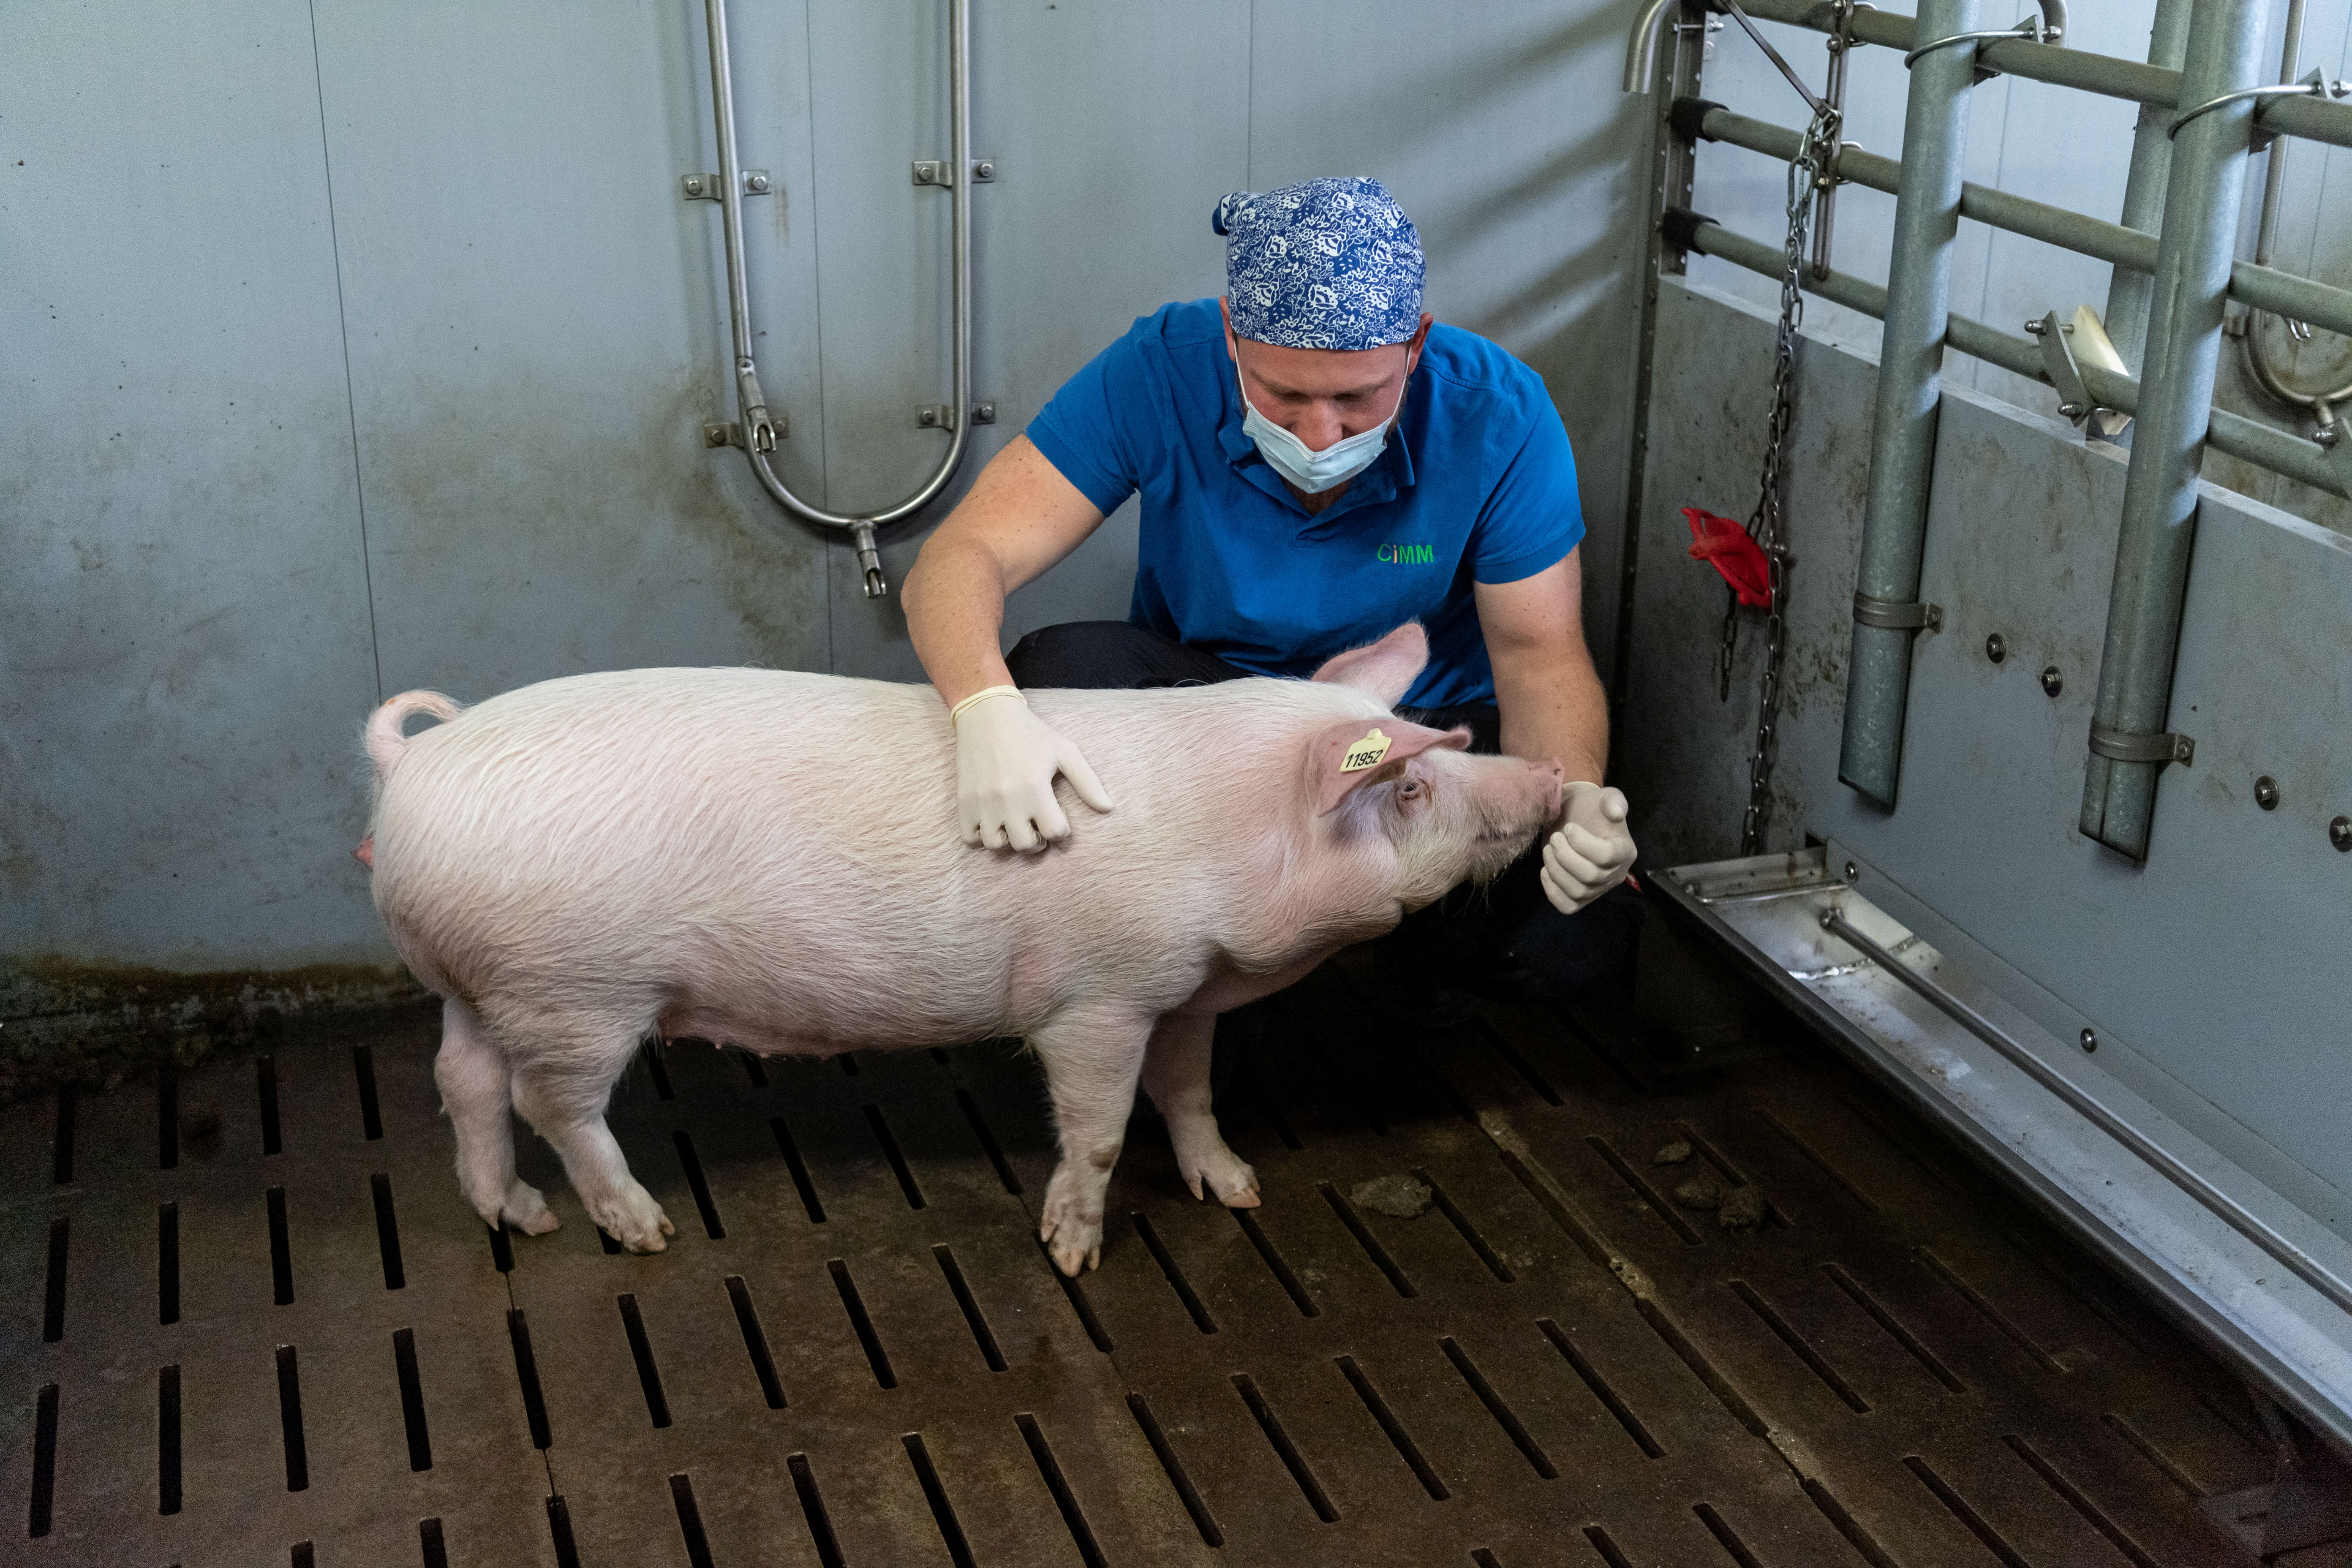 German researchers genetically modify pigs for transplantation into humans